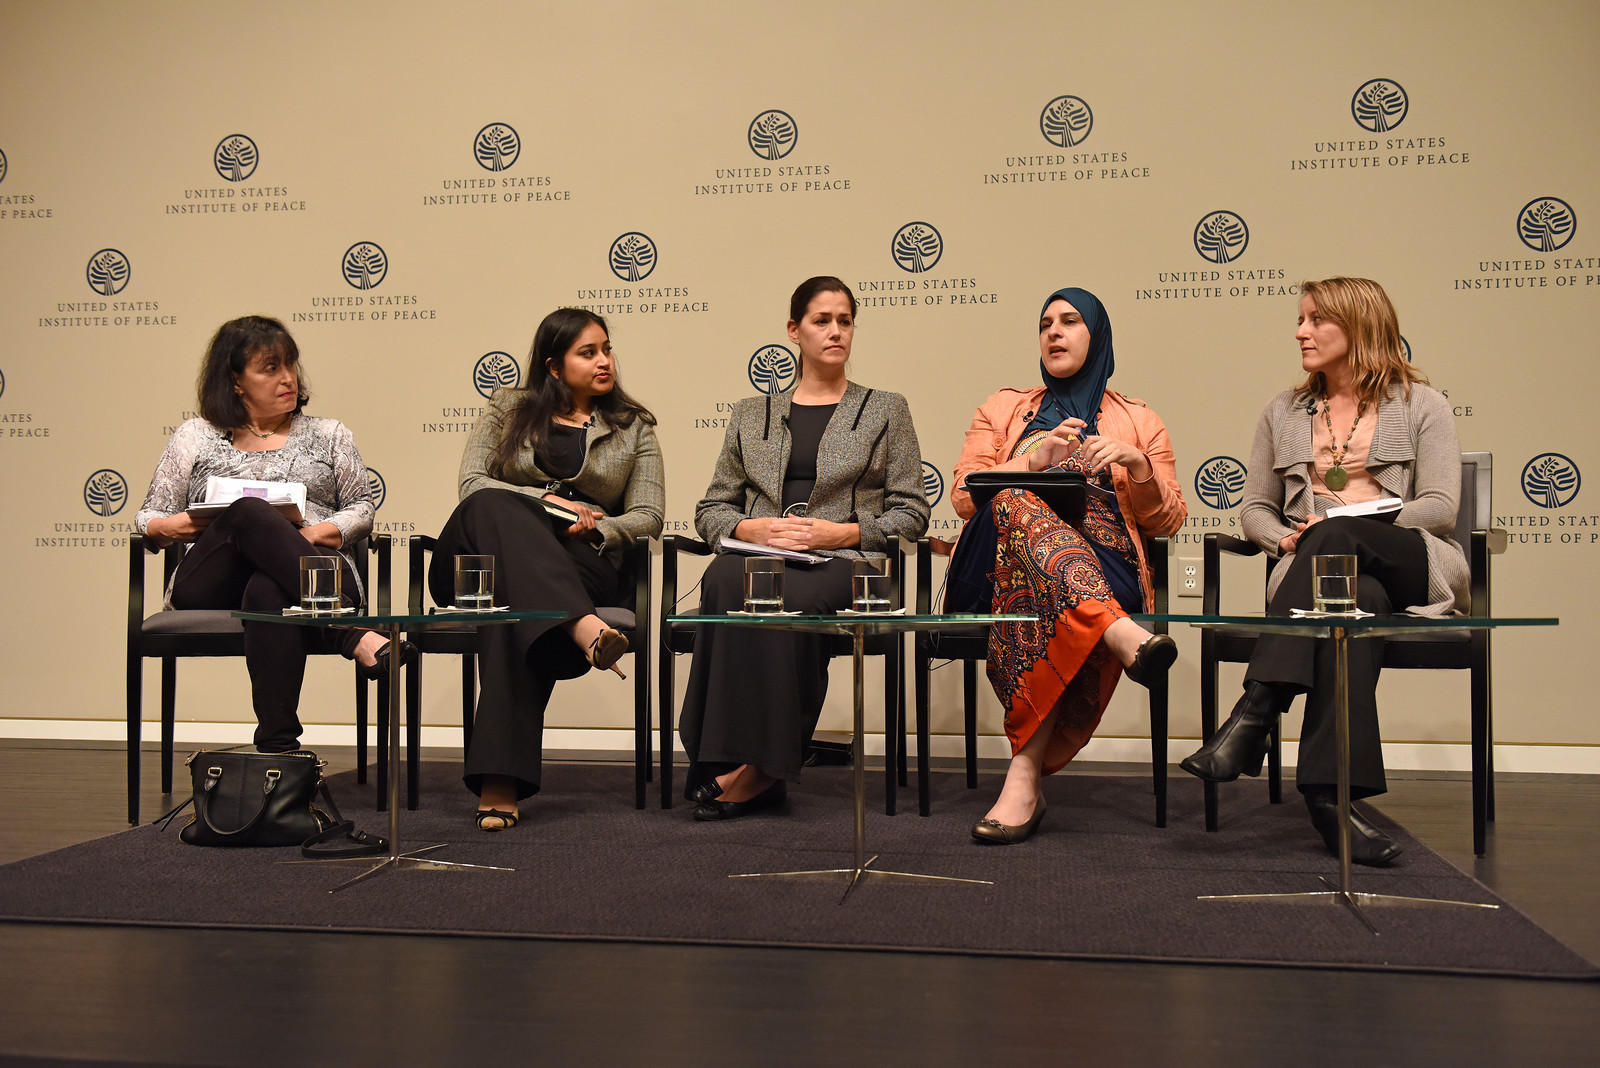 Discussion surrounding the film “Gender Equality in Islam”